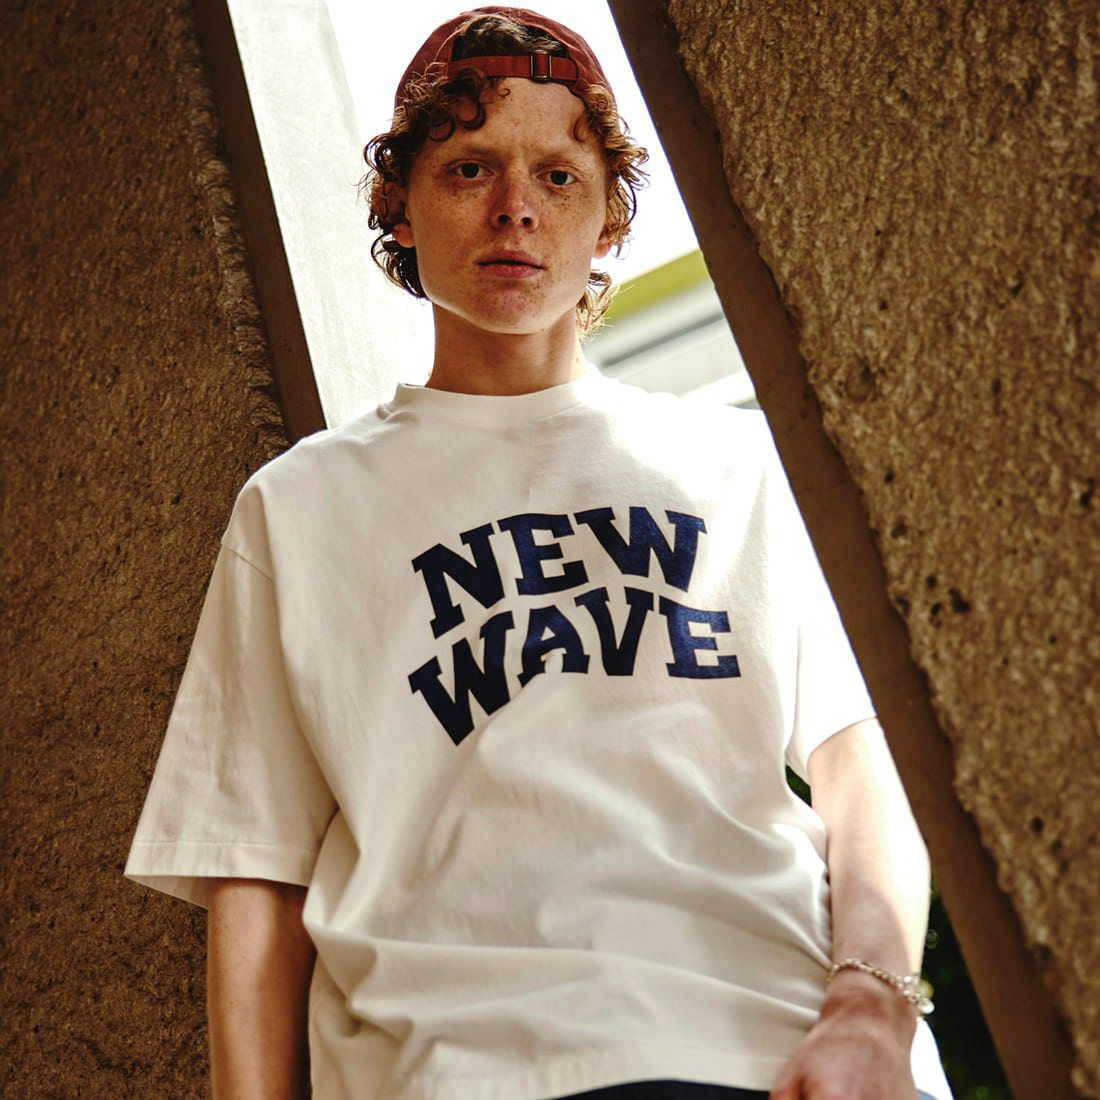 blurhms ROOTSTOCK [ブラームス ルーツストック] 別注 NEW WAVE プリントTシャツ [BROOTS24S34-JF] WHITE &&モデル身長：183cm 着用サイズ：3&&